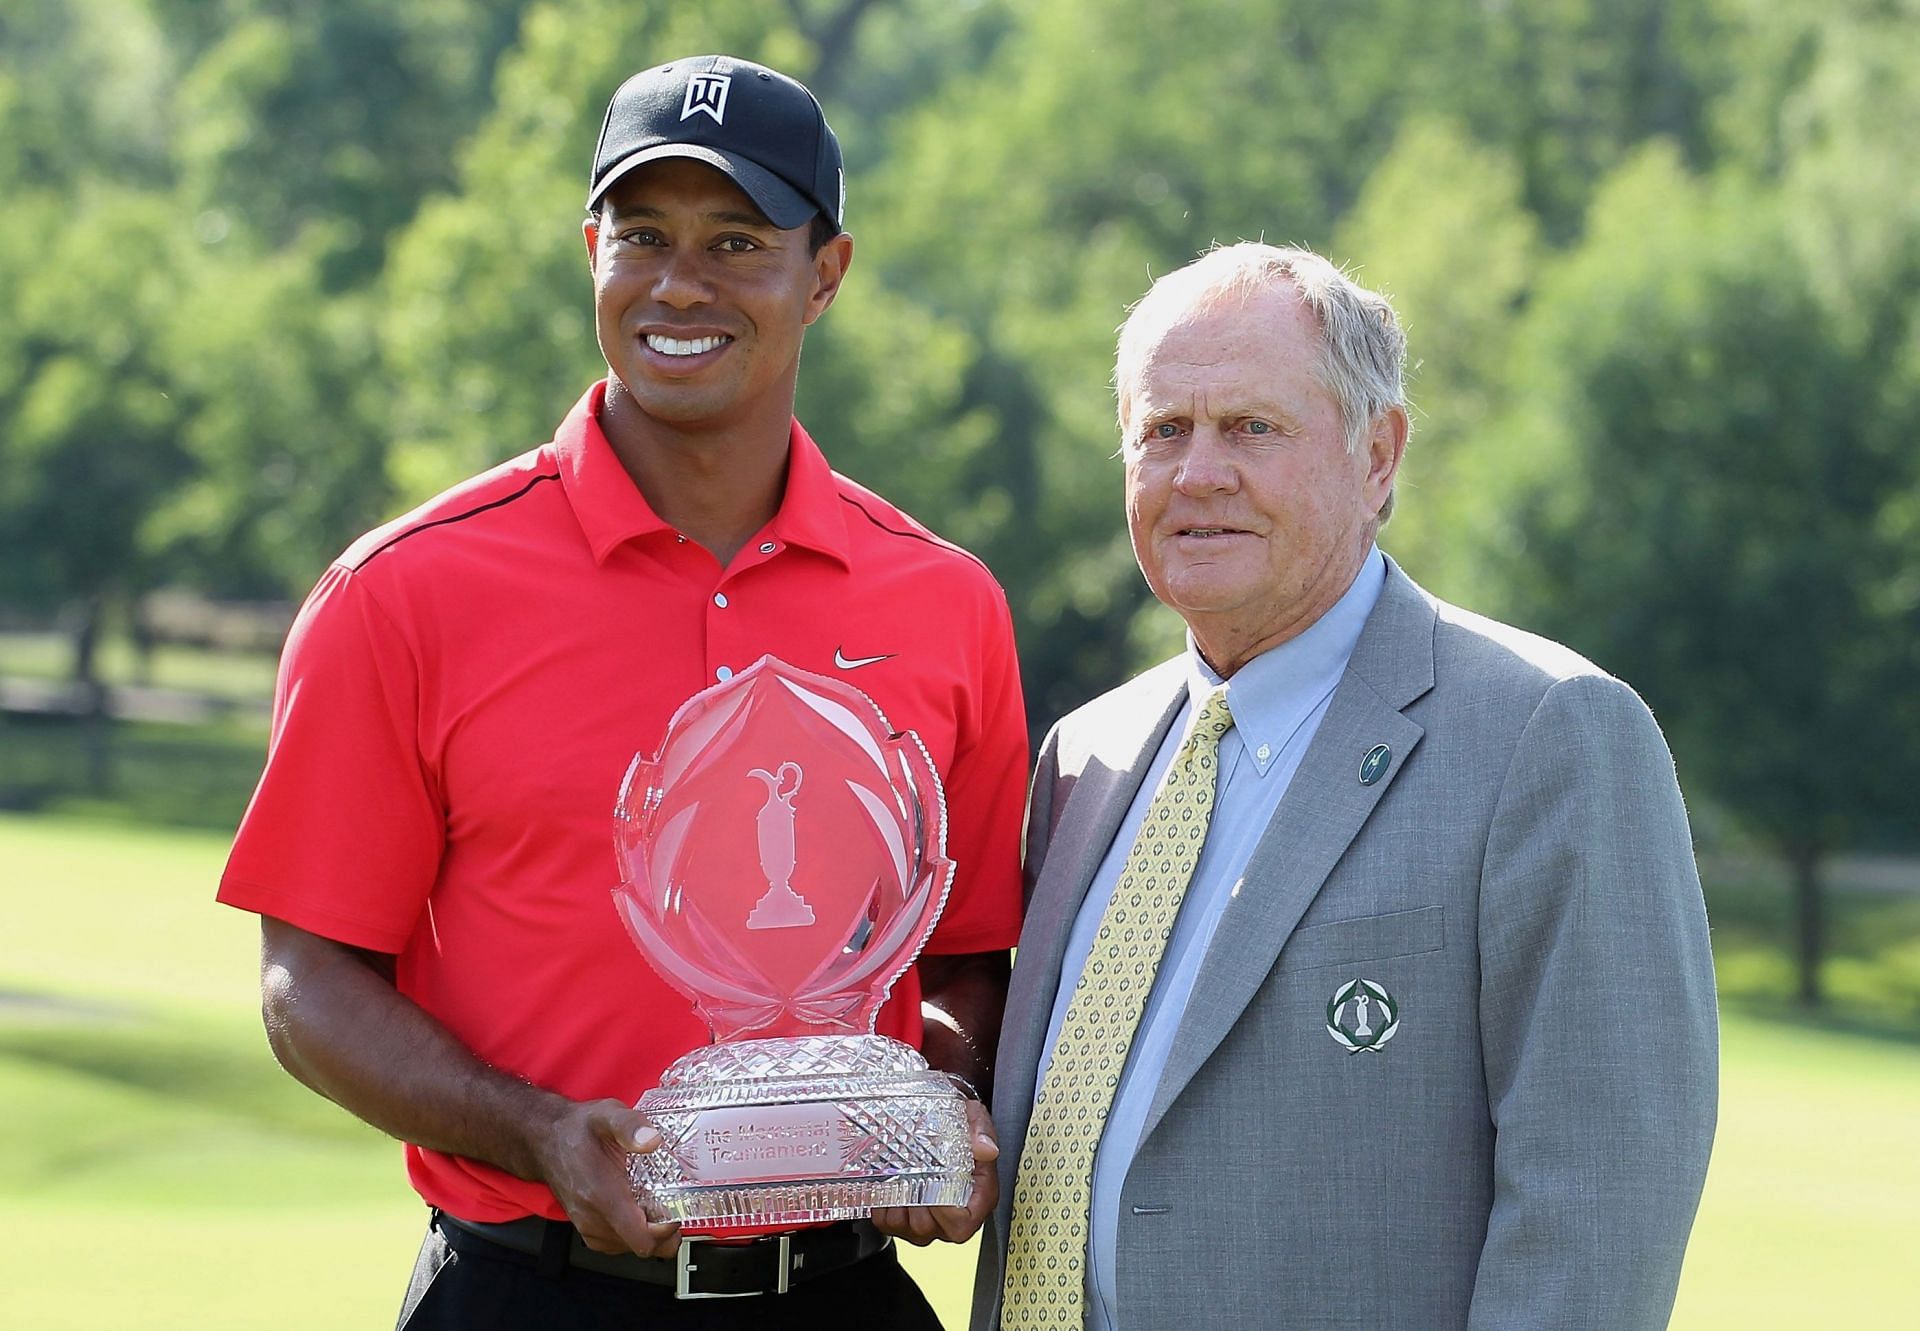 Tiger Woods won the Memorial Tournament for the record fifth time in 2012